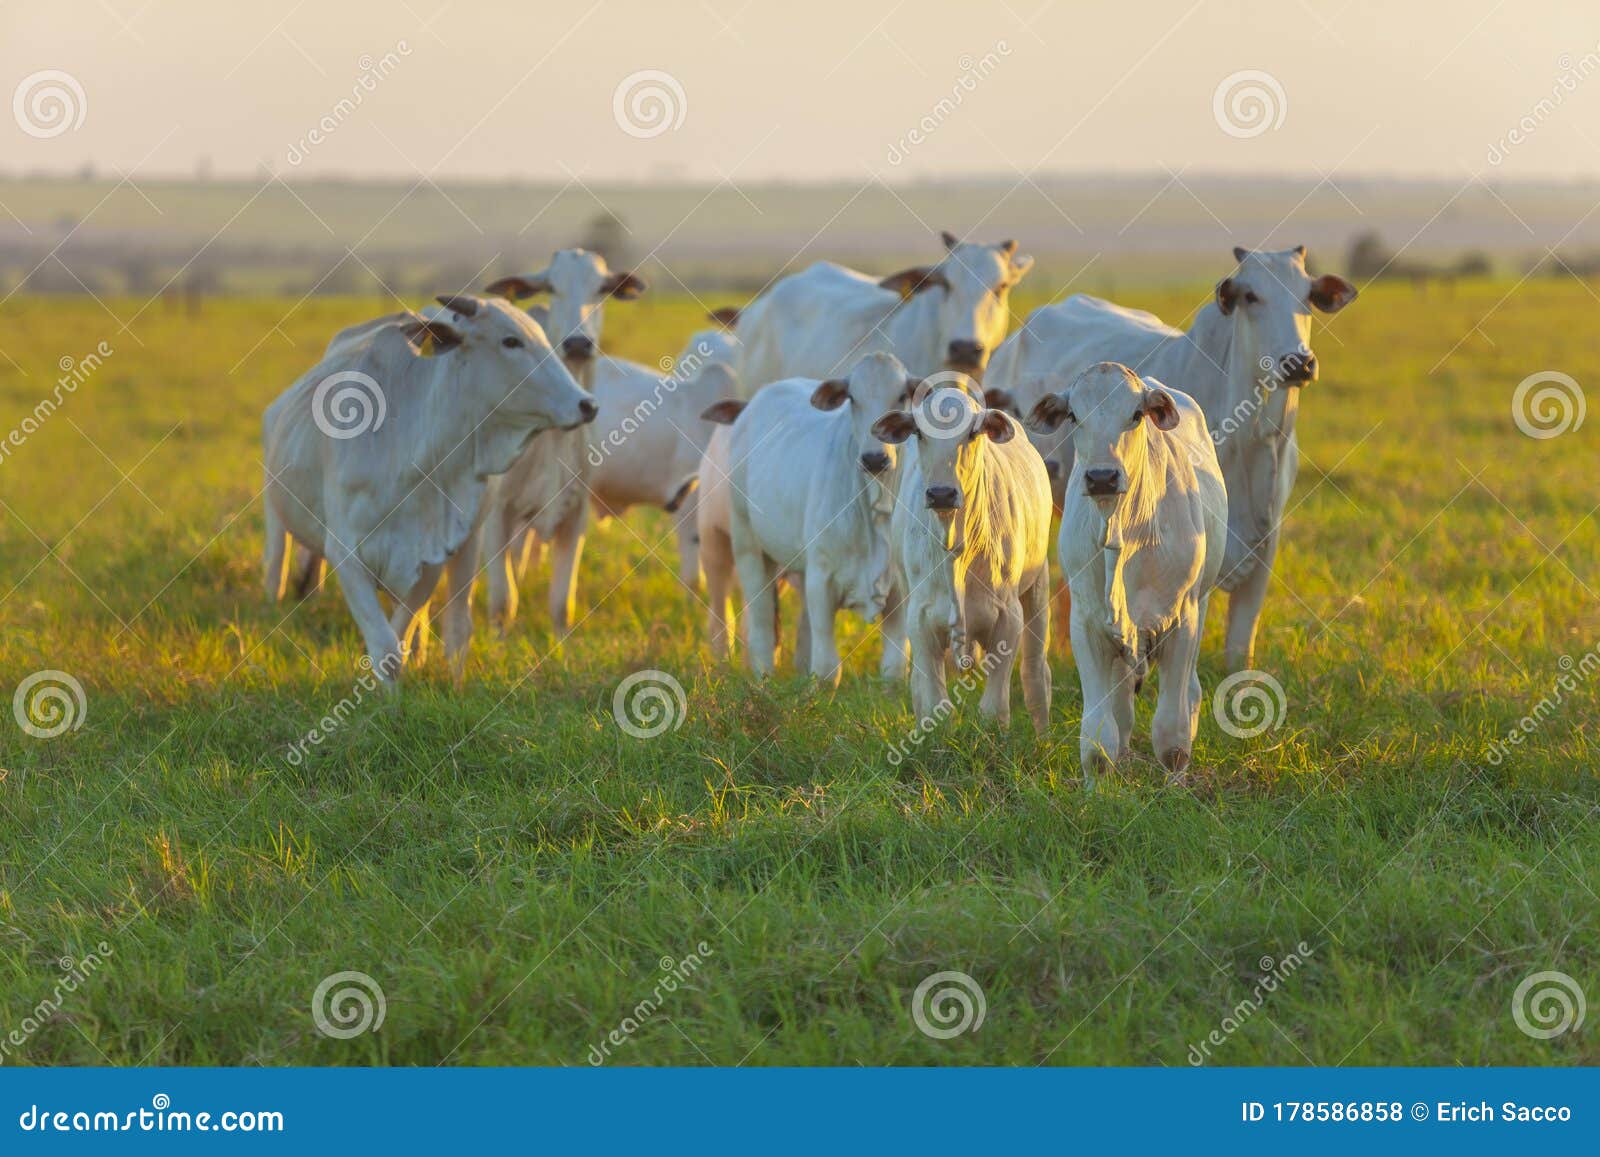 small herd of nelore cattle in the late afternoon, cows and calves